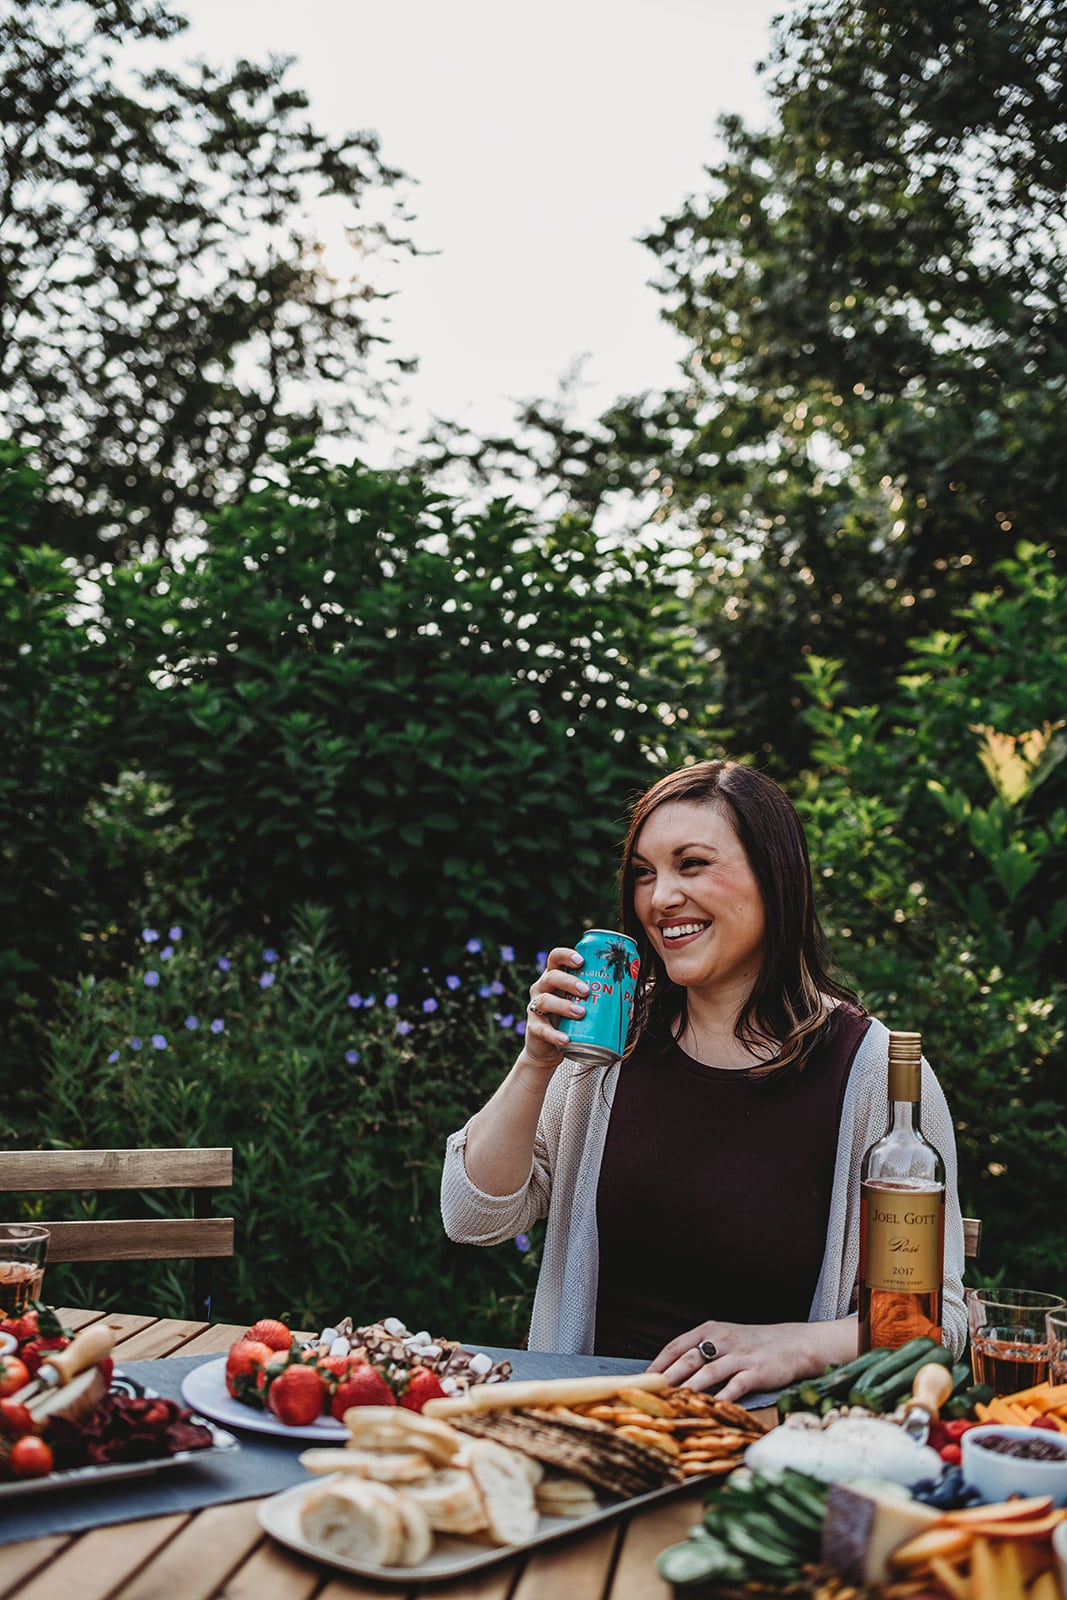 Shot of a smiling woman sitting at a beautiful tables cape in a garden holding a can of beer